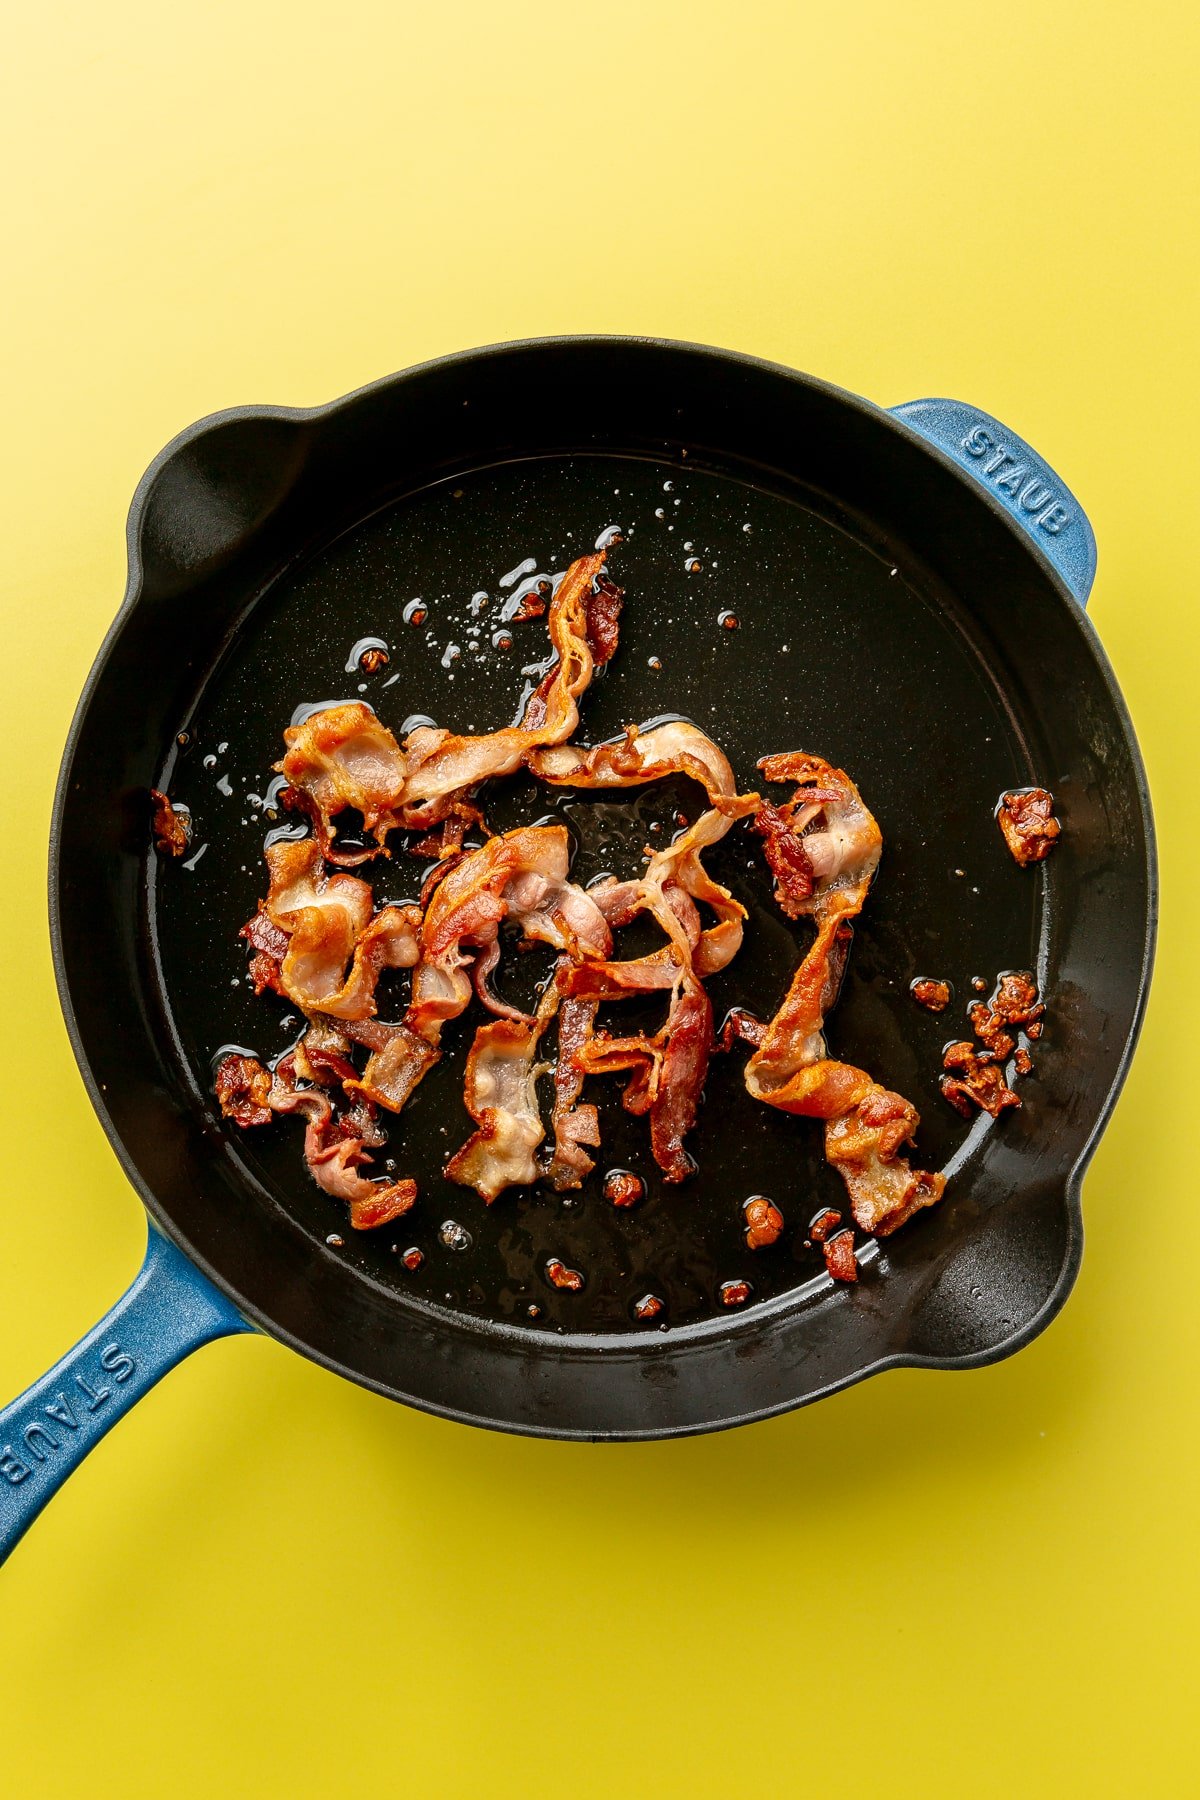 Strips of bacon are shown being cooked in a black cast-iron skillet with blue handles.